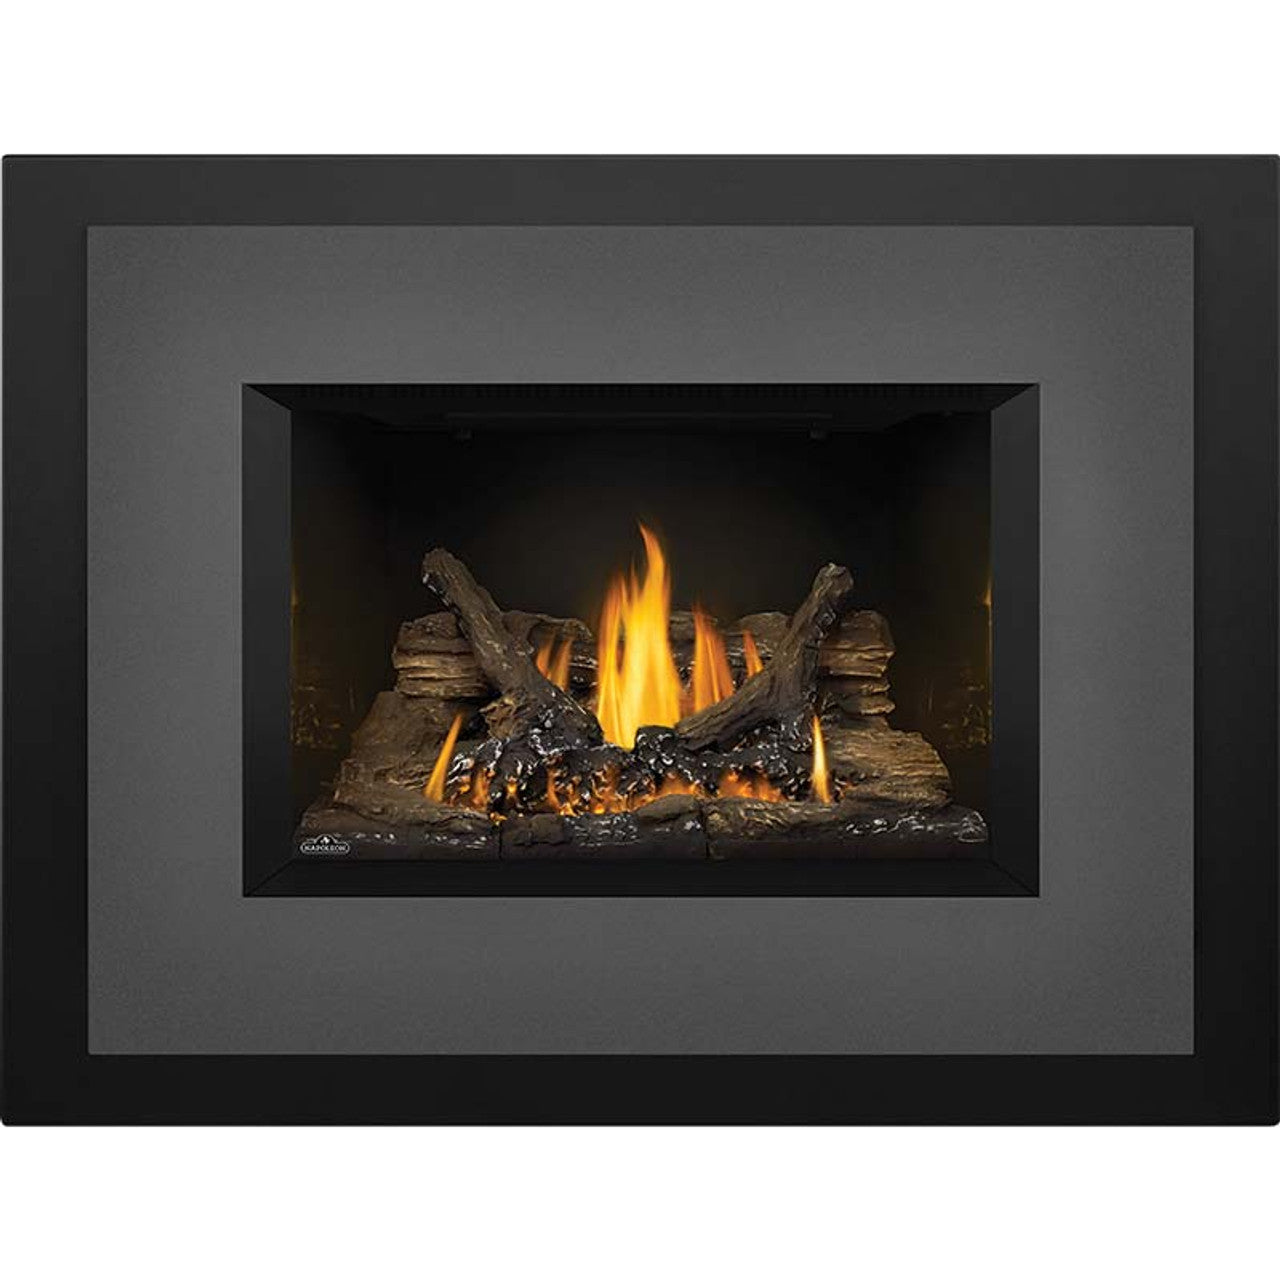 Napoleon OAKVILLE 3 Direct Vent Natural Gas Fireplace Insert - GDI3N-1 - Chimney Cricket